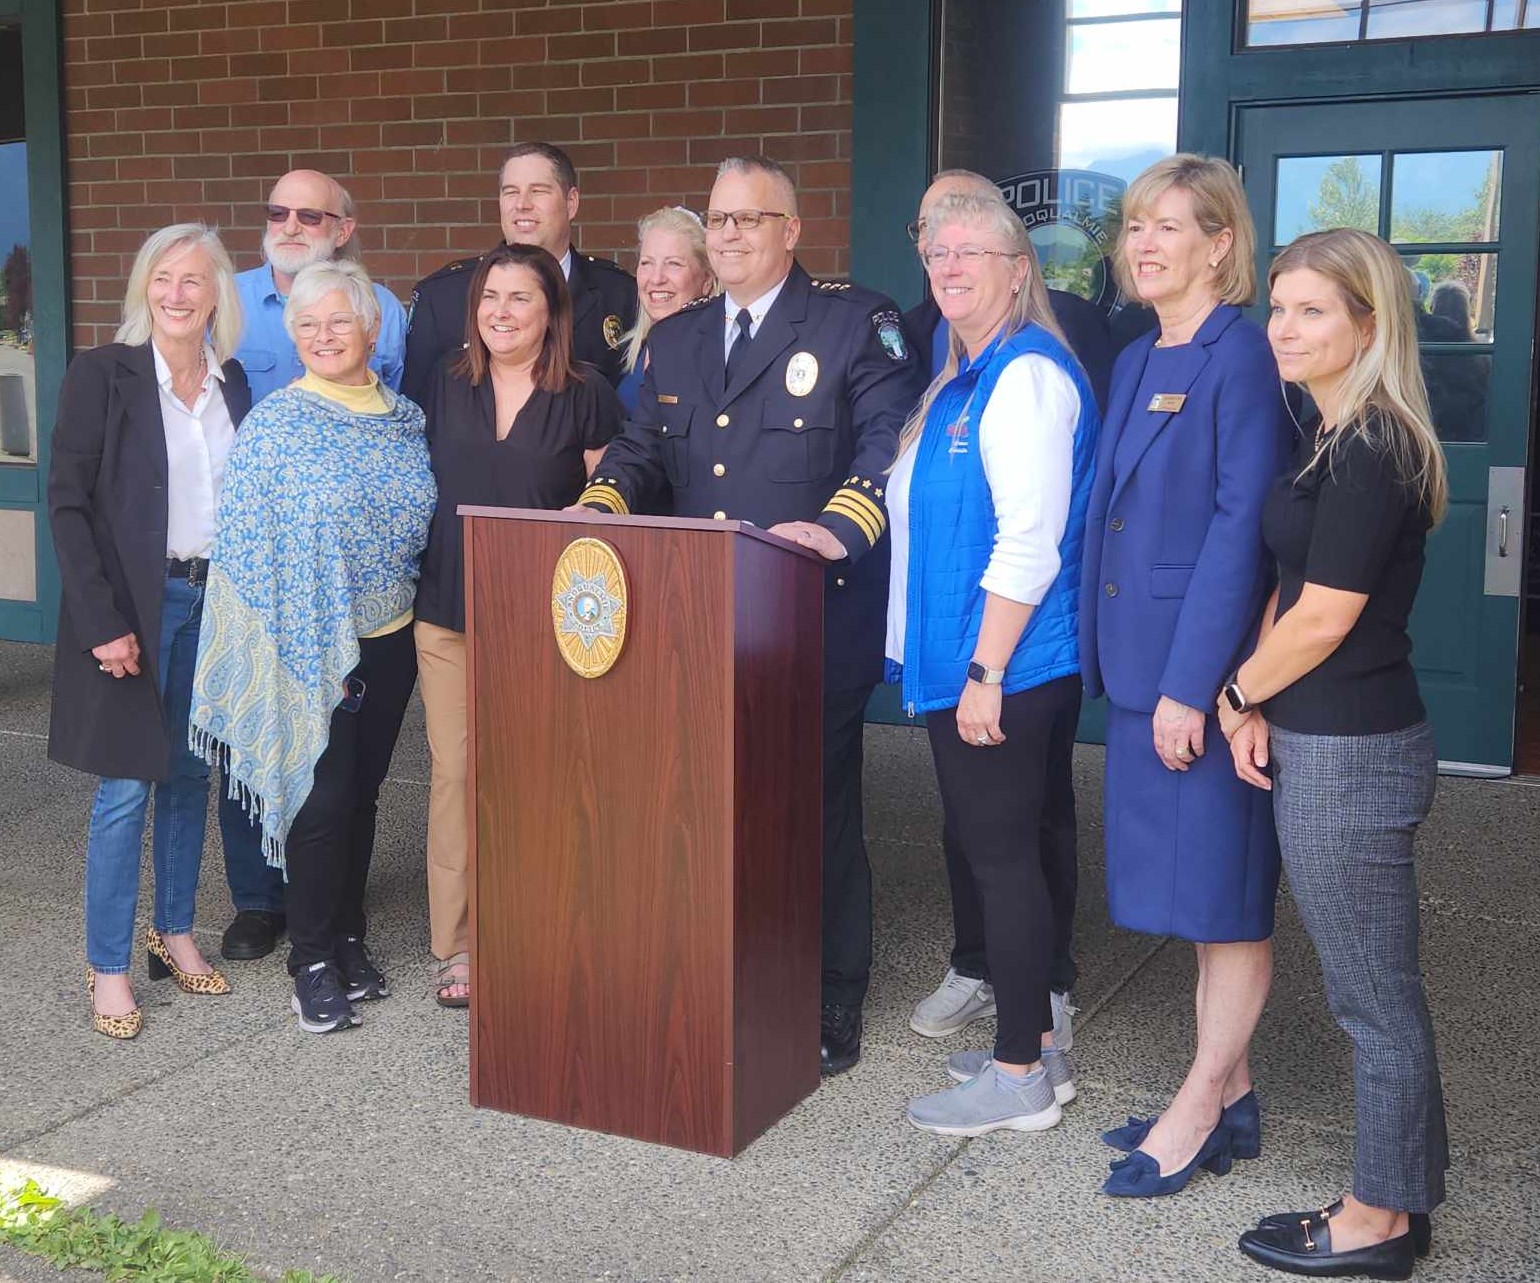  Enhancing Safety and Community: The New North Bend Police Substation - Living Snoqualmie 